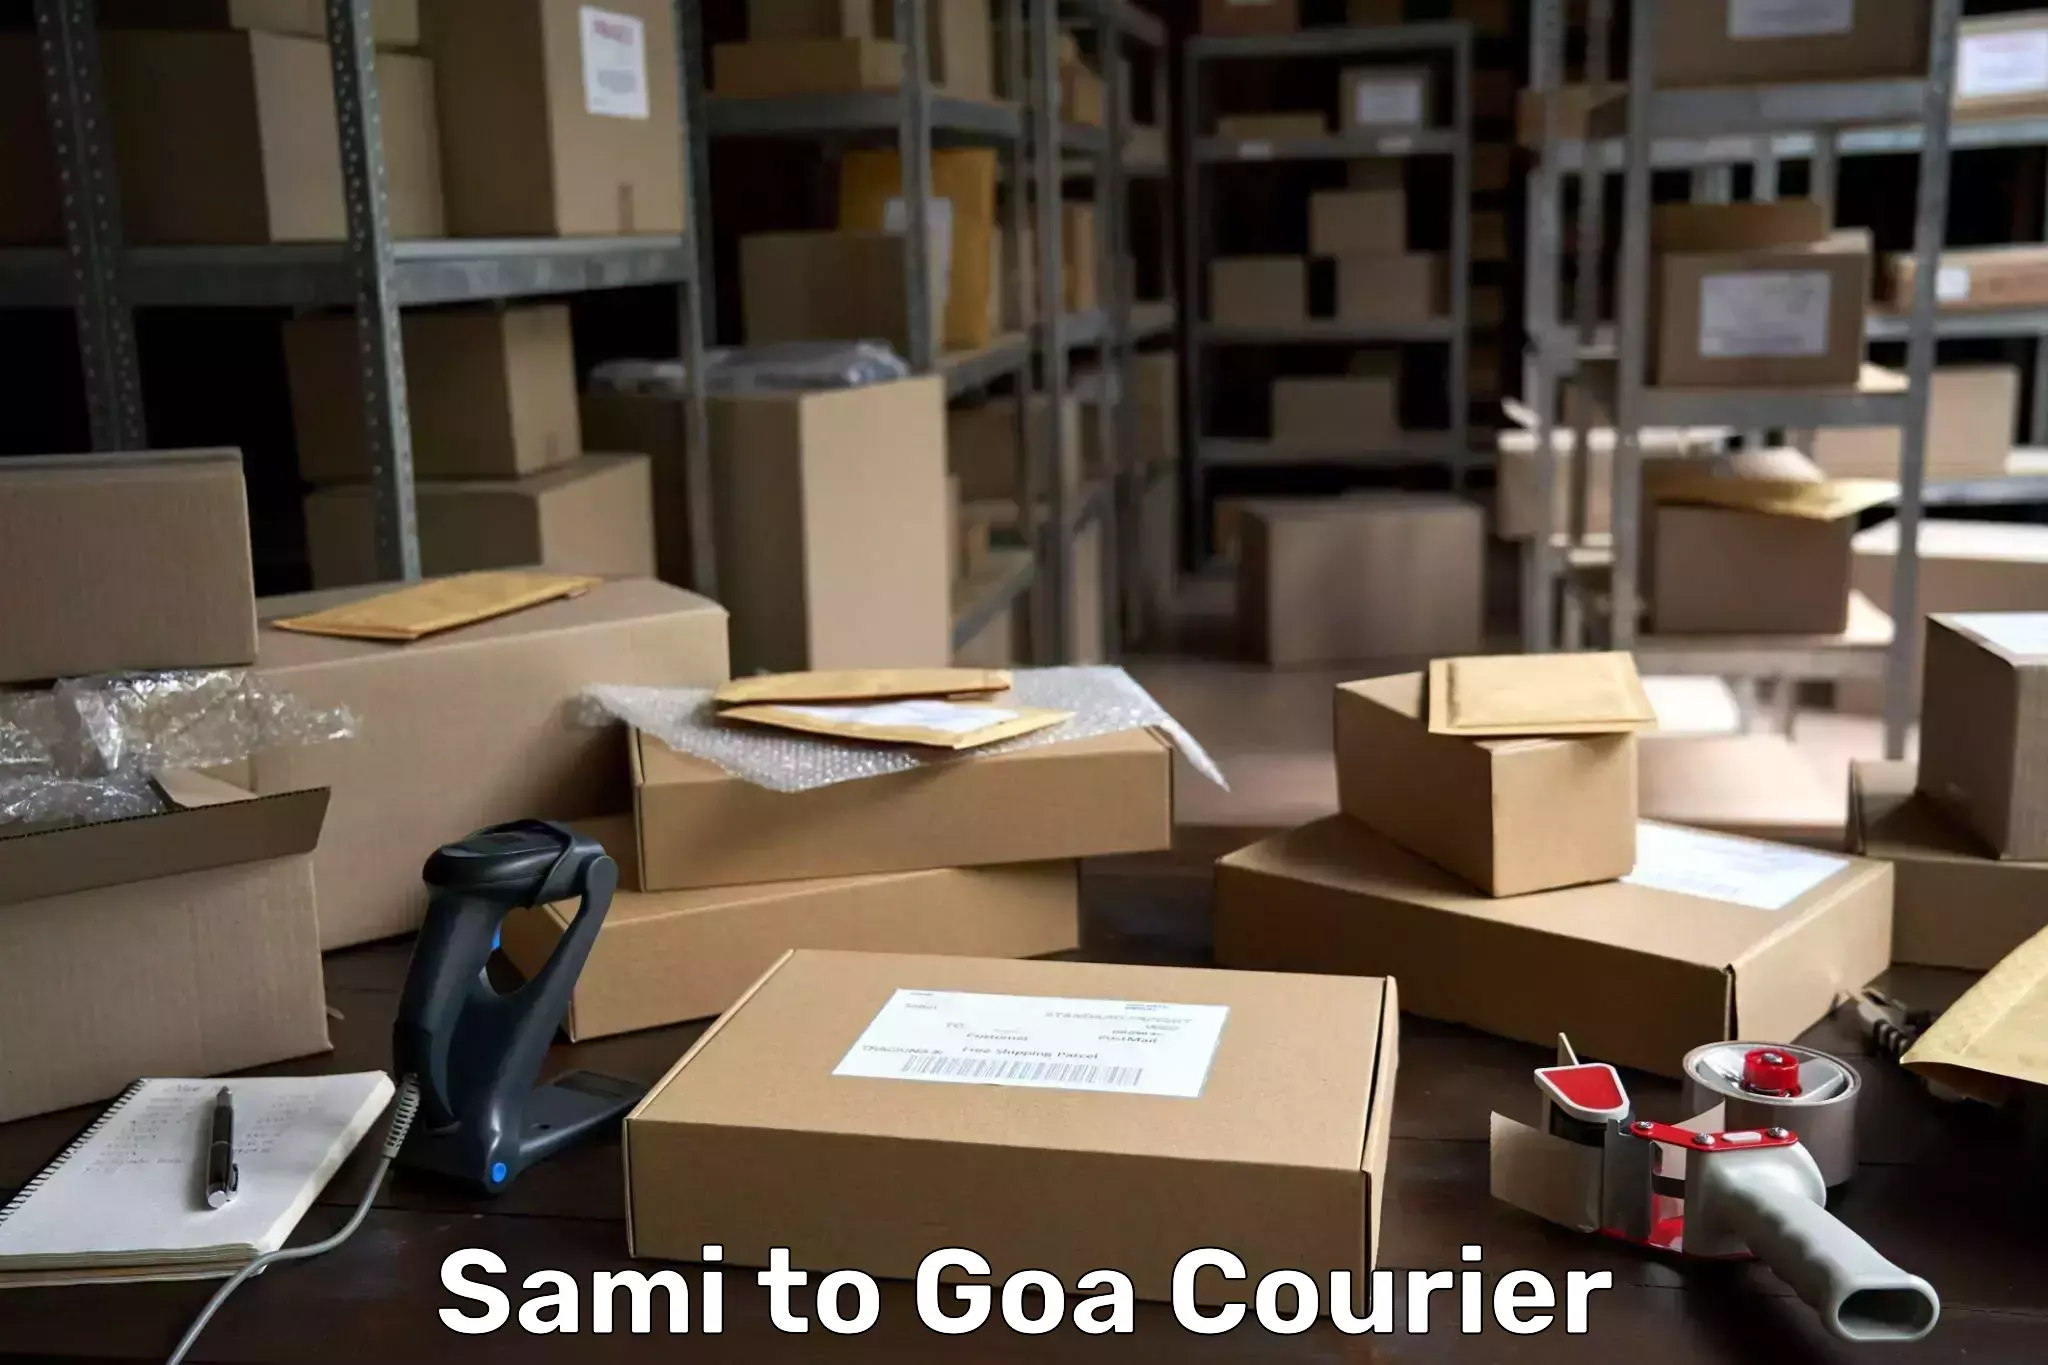 Round-the-clock parcel delivery Sami to Goa